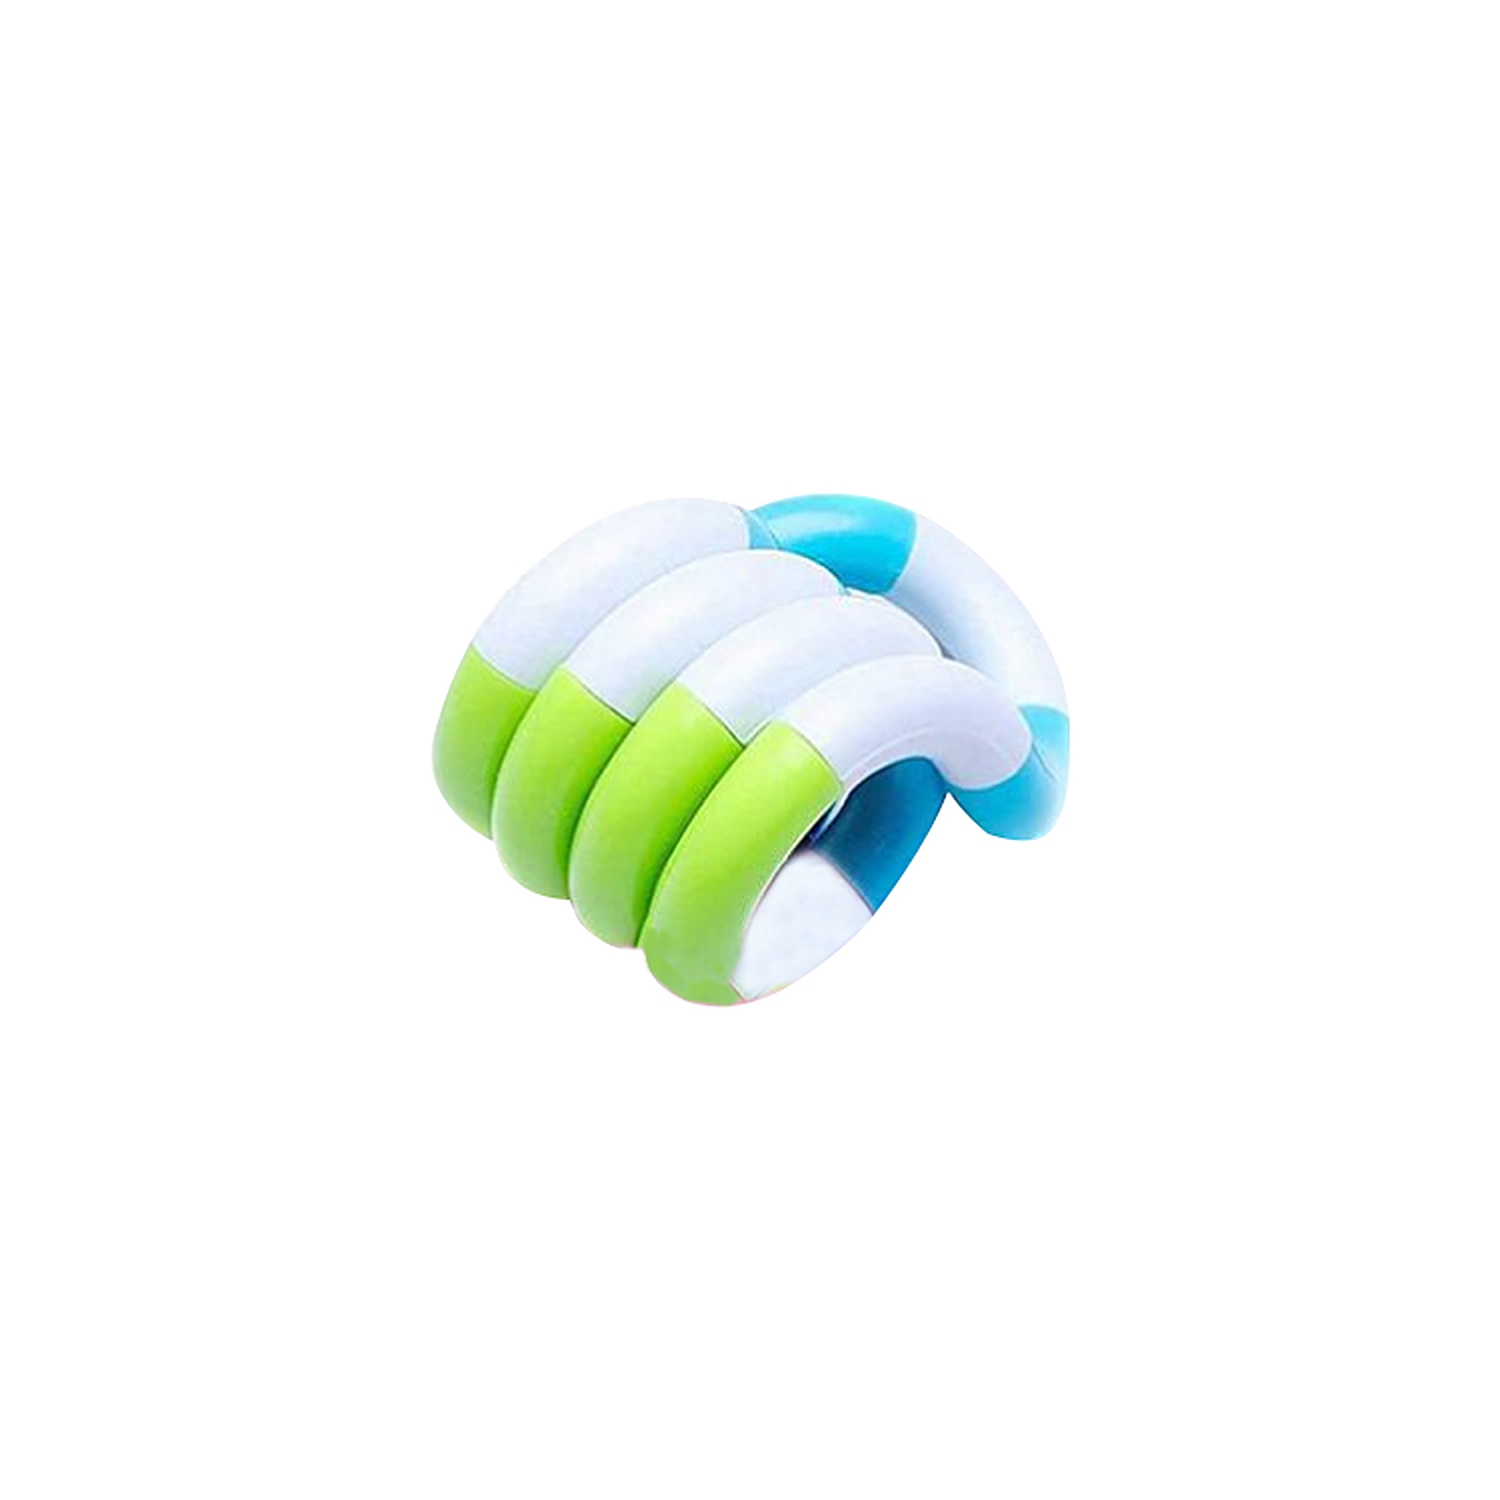 Tangles Pop Fidget Toy Stress Reliever - White/Blue/Green